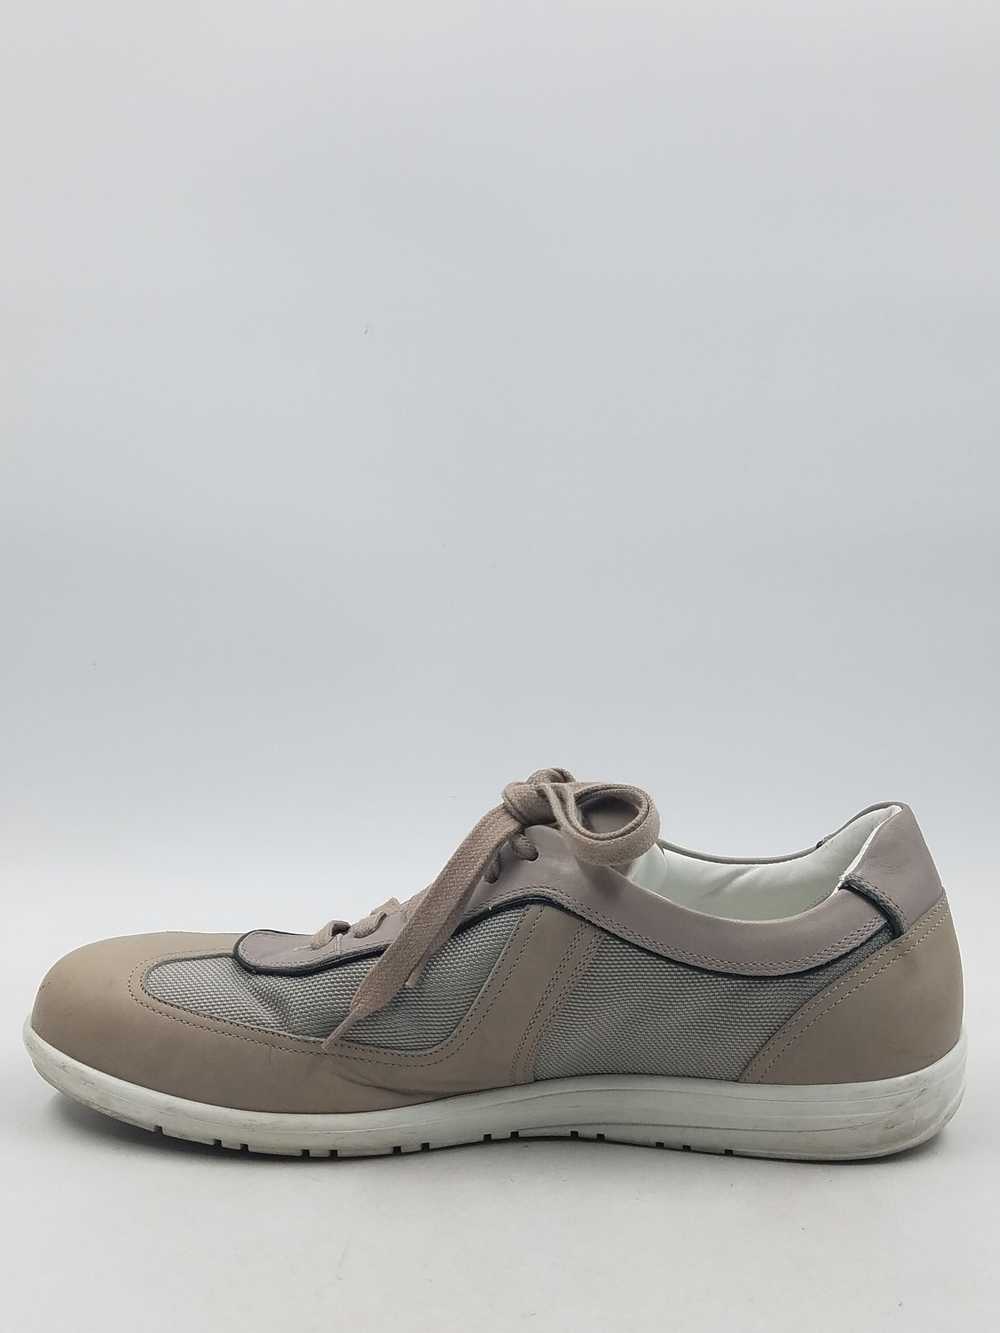 Canali Taupe Gray Leather Trim Sneaker M 10 - image 2